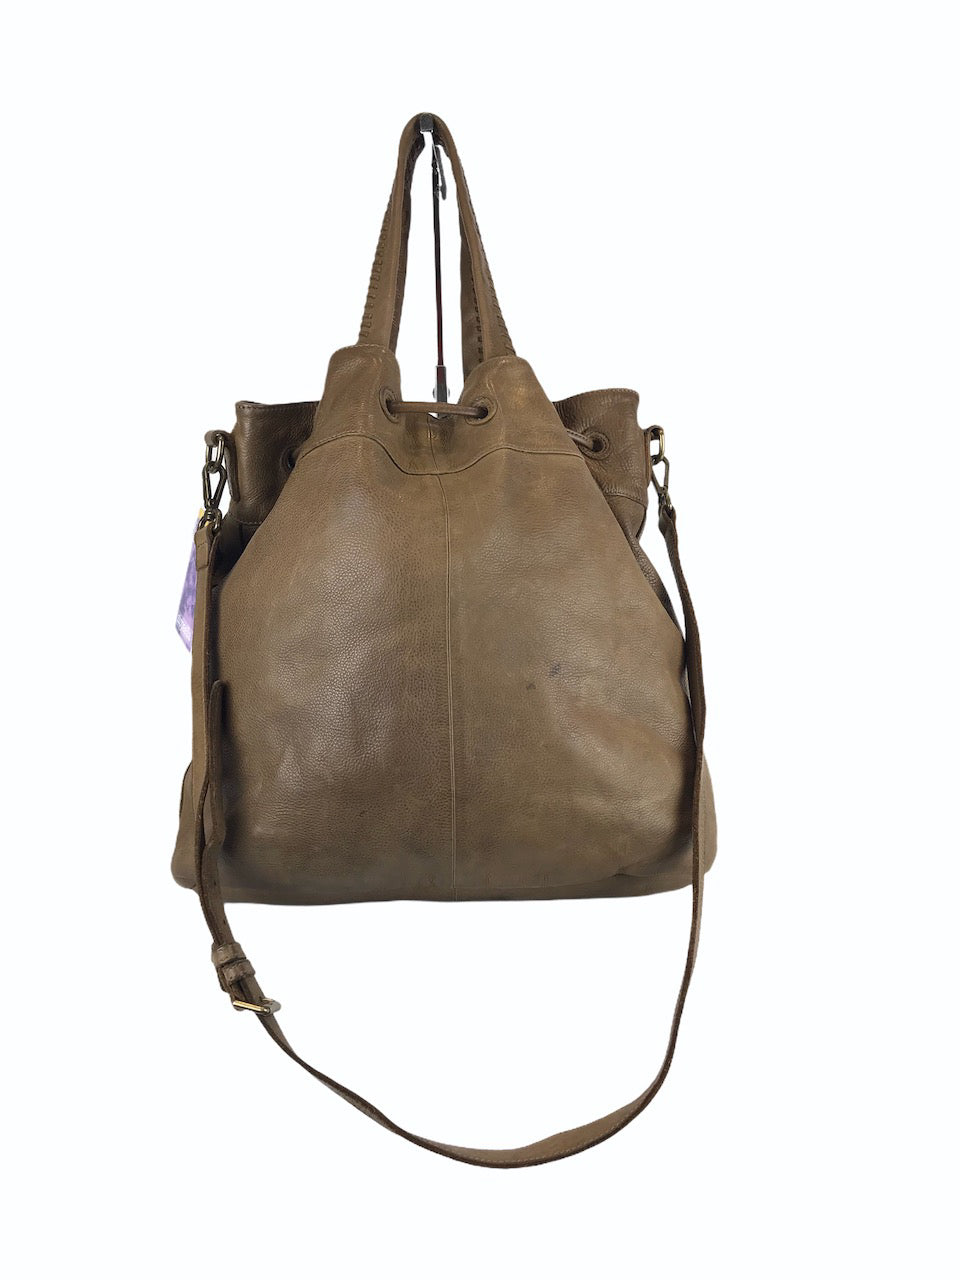 Massimo Dutti Brown Woven Leather Bucket Bag - As Seen On Instagram 09/09/2020 - Siopaella Designer Exchange